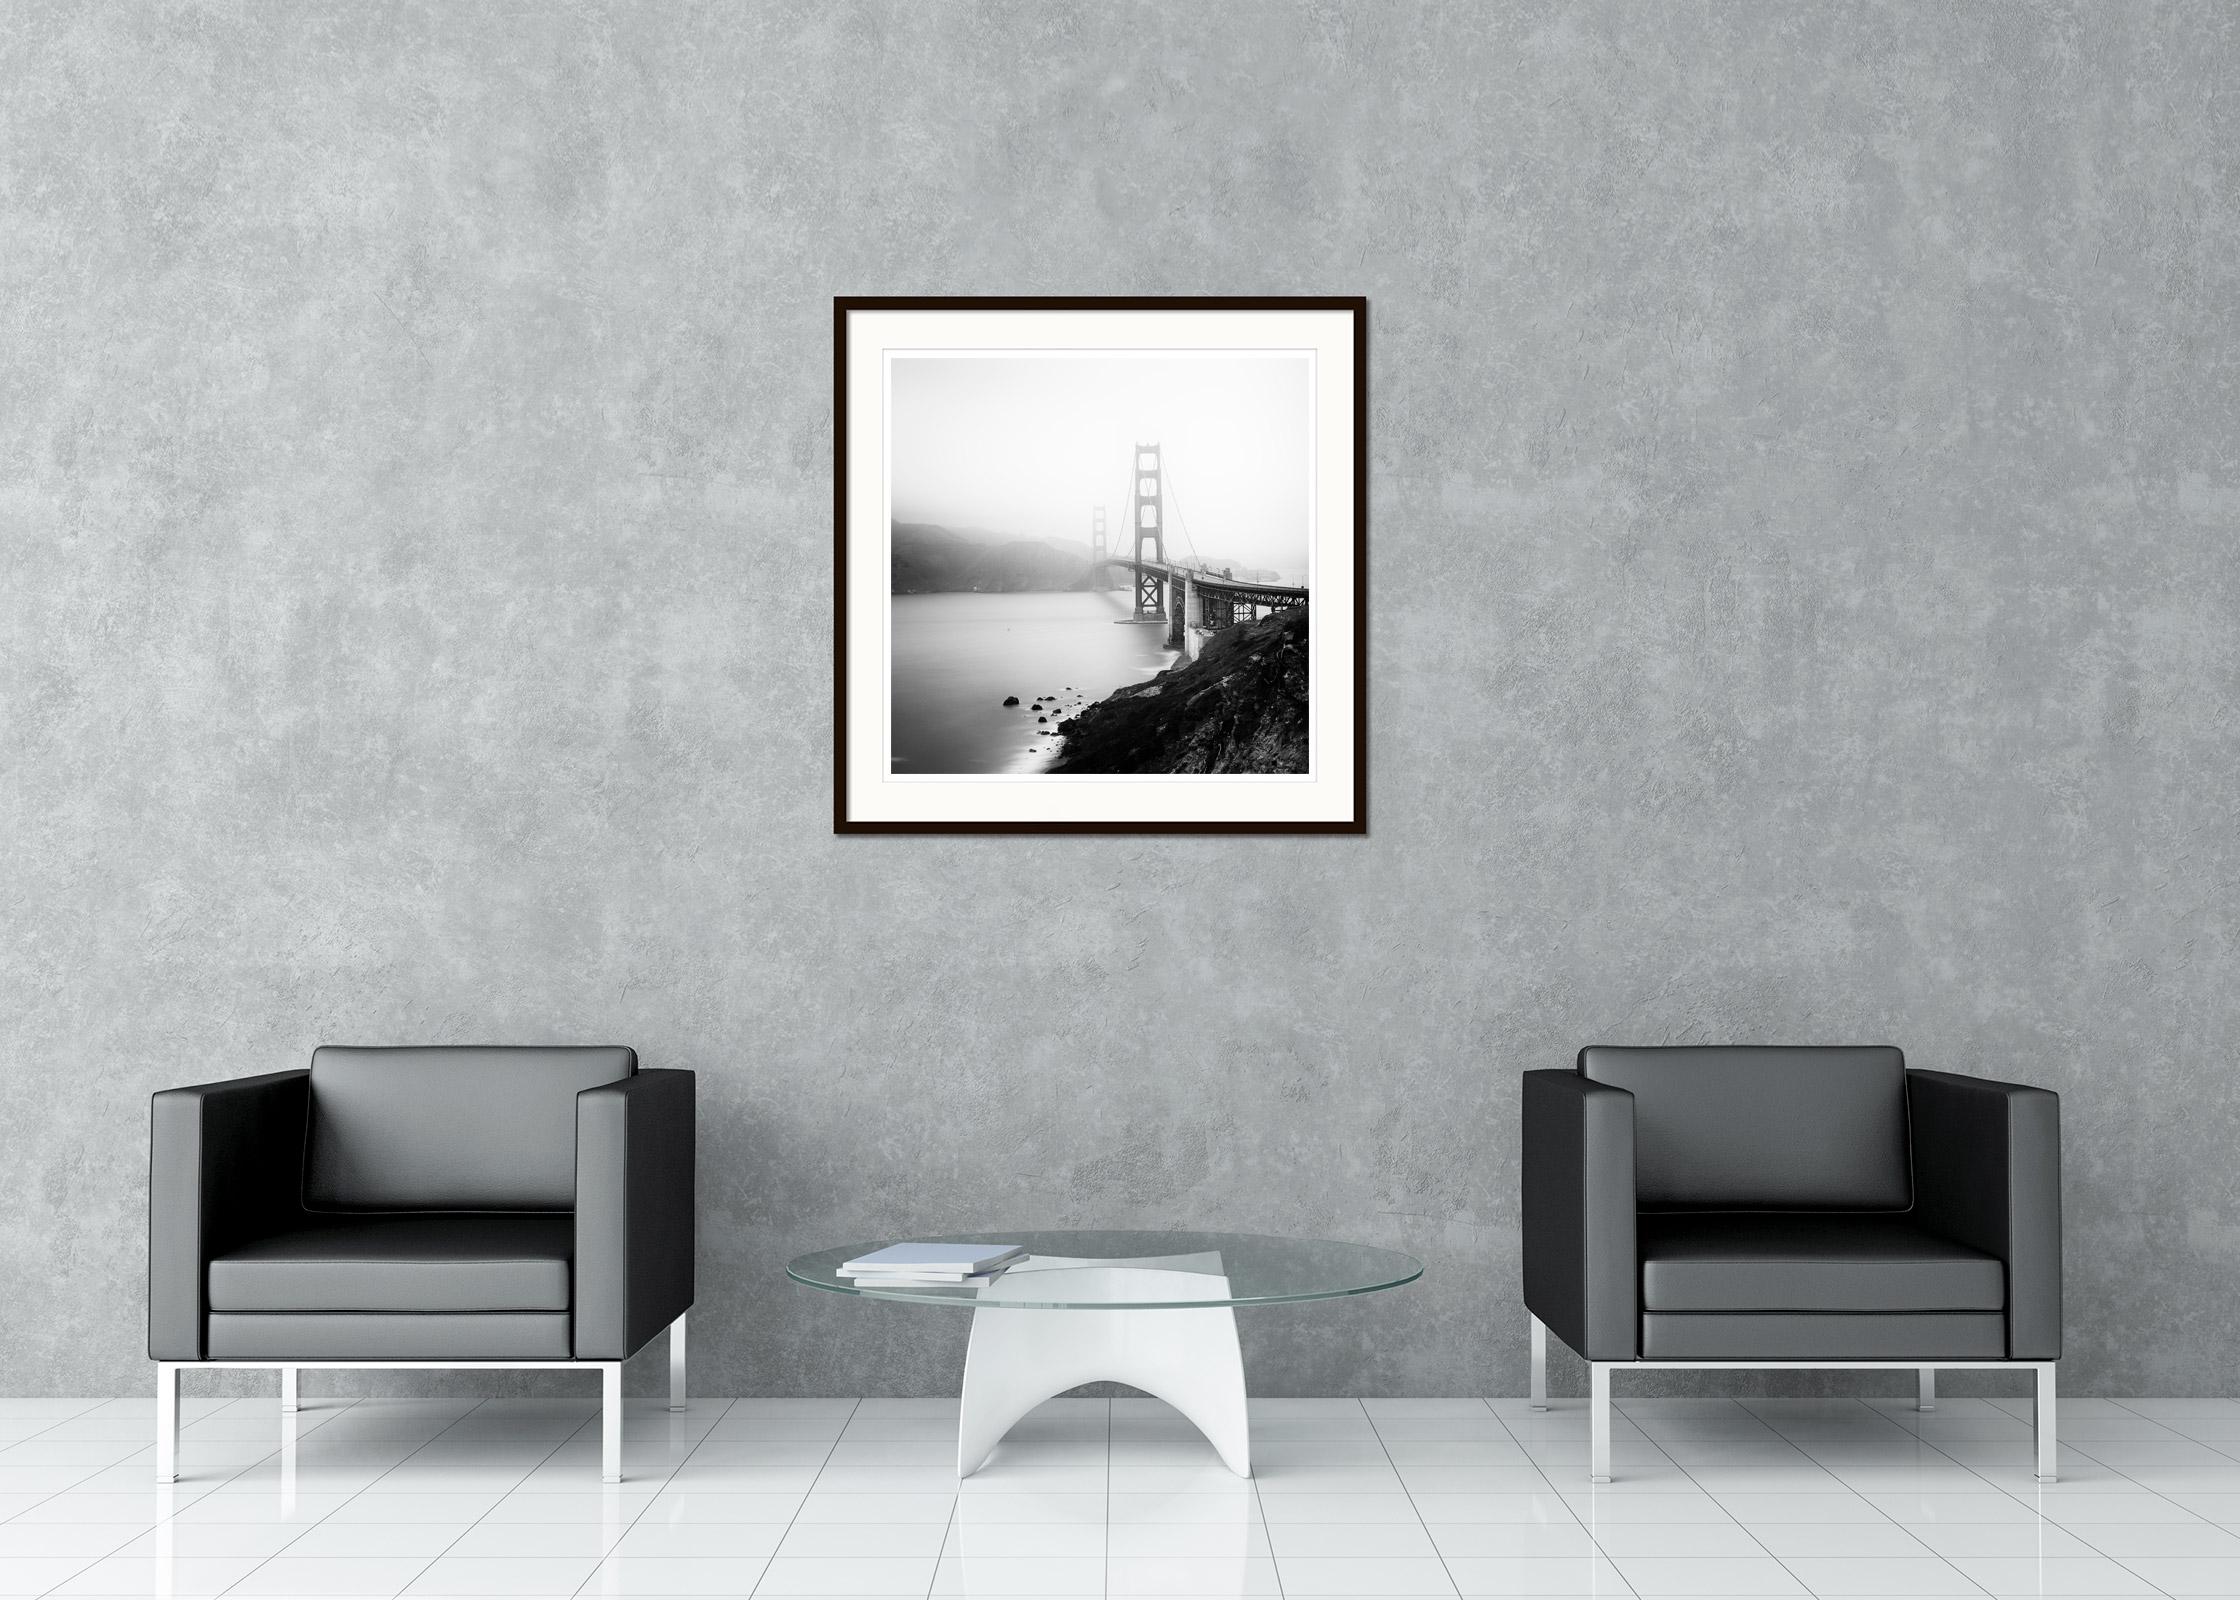 Black and white fine art cityscape - landscape photography. Golden Gate Bridge, foggy morning, Fort Point, San Francisco, USA. Archival pigment ink print, edition of 9. Signed, titled, dated and numbered by artist. Certificate of authenticity